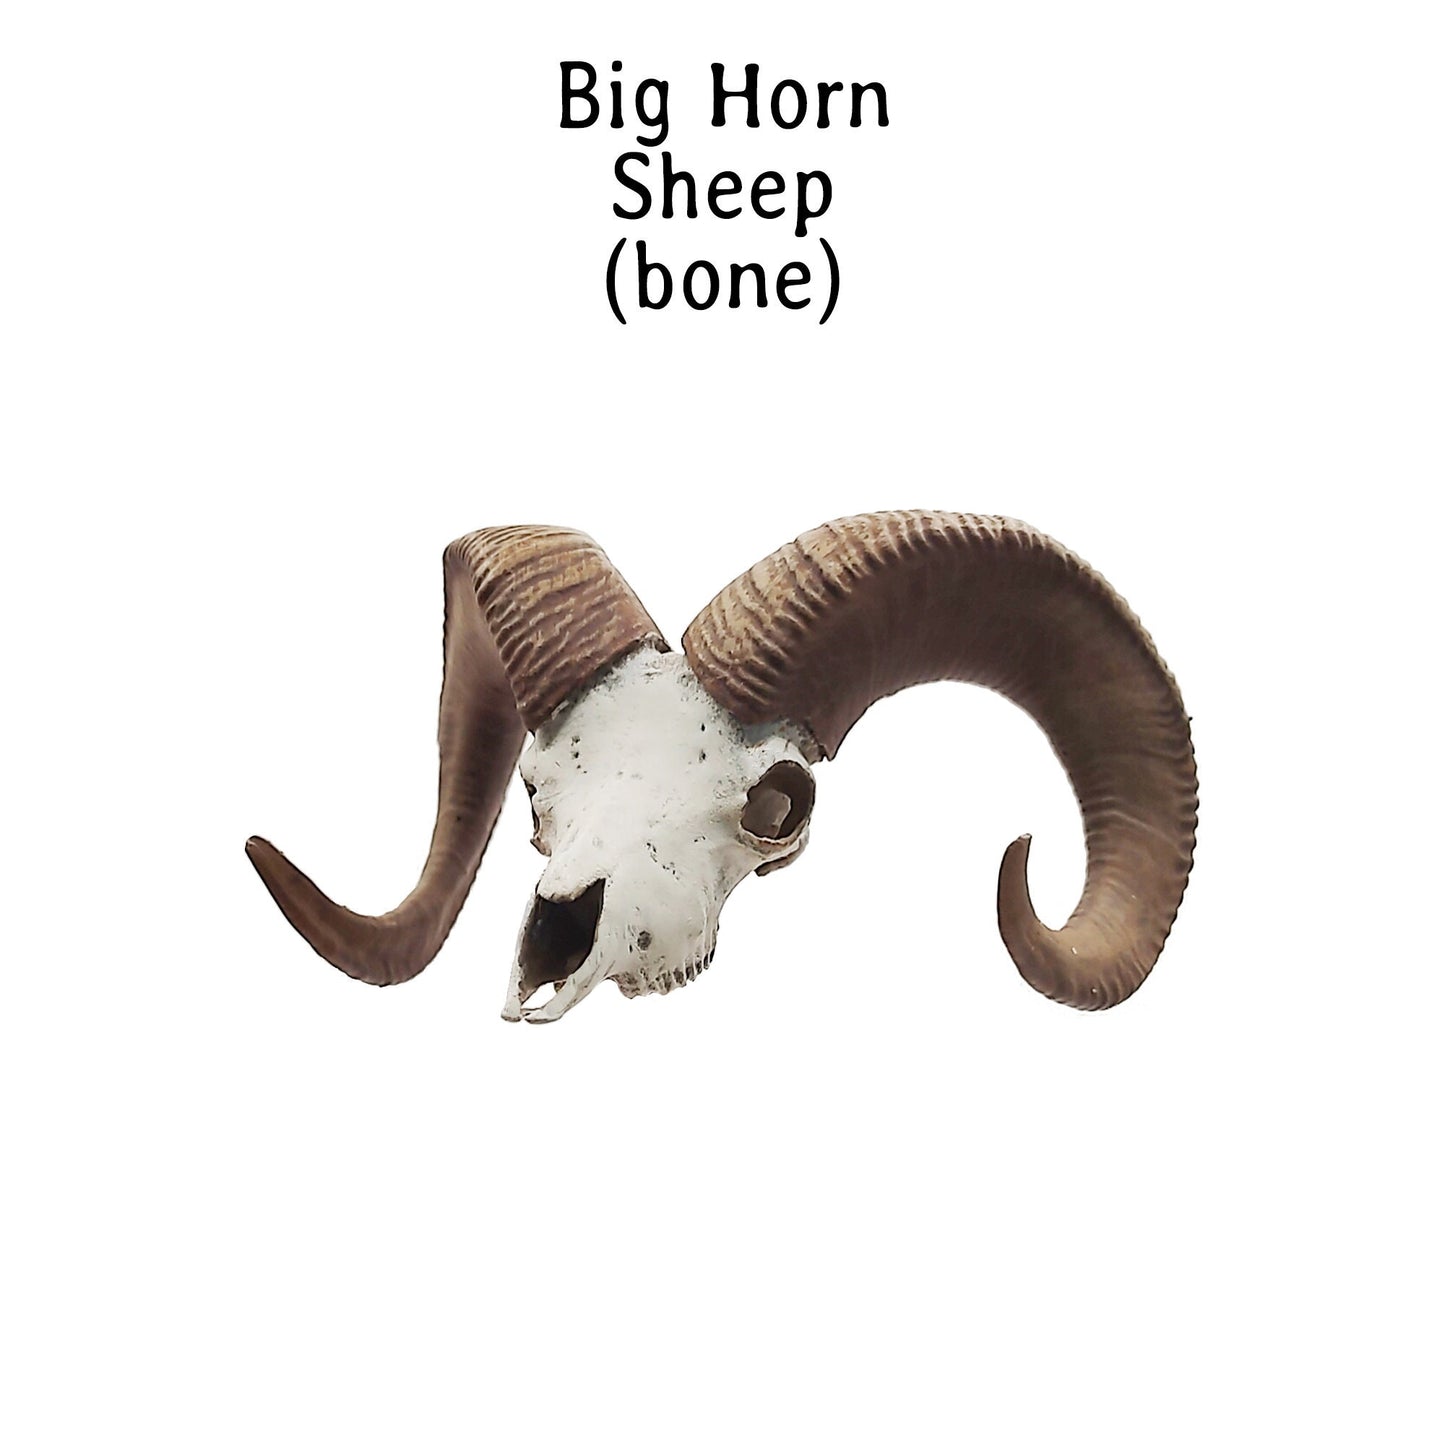 Big horn sheep skull replica, 1:12 scale miniature cranium with horns for use with dioramas, action figures, dollhouses, horror. (1 skull)